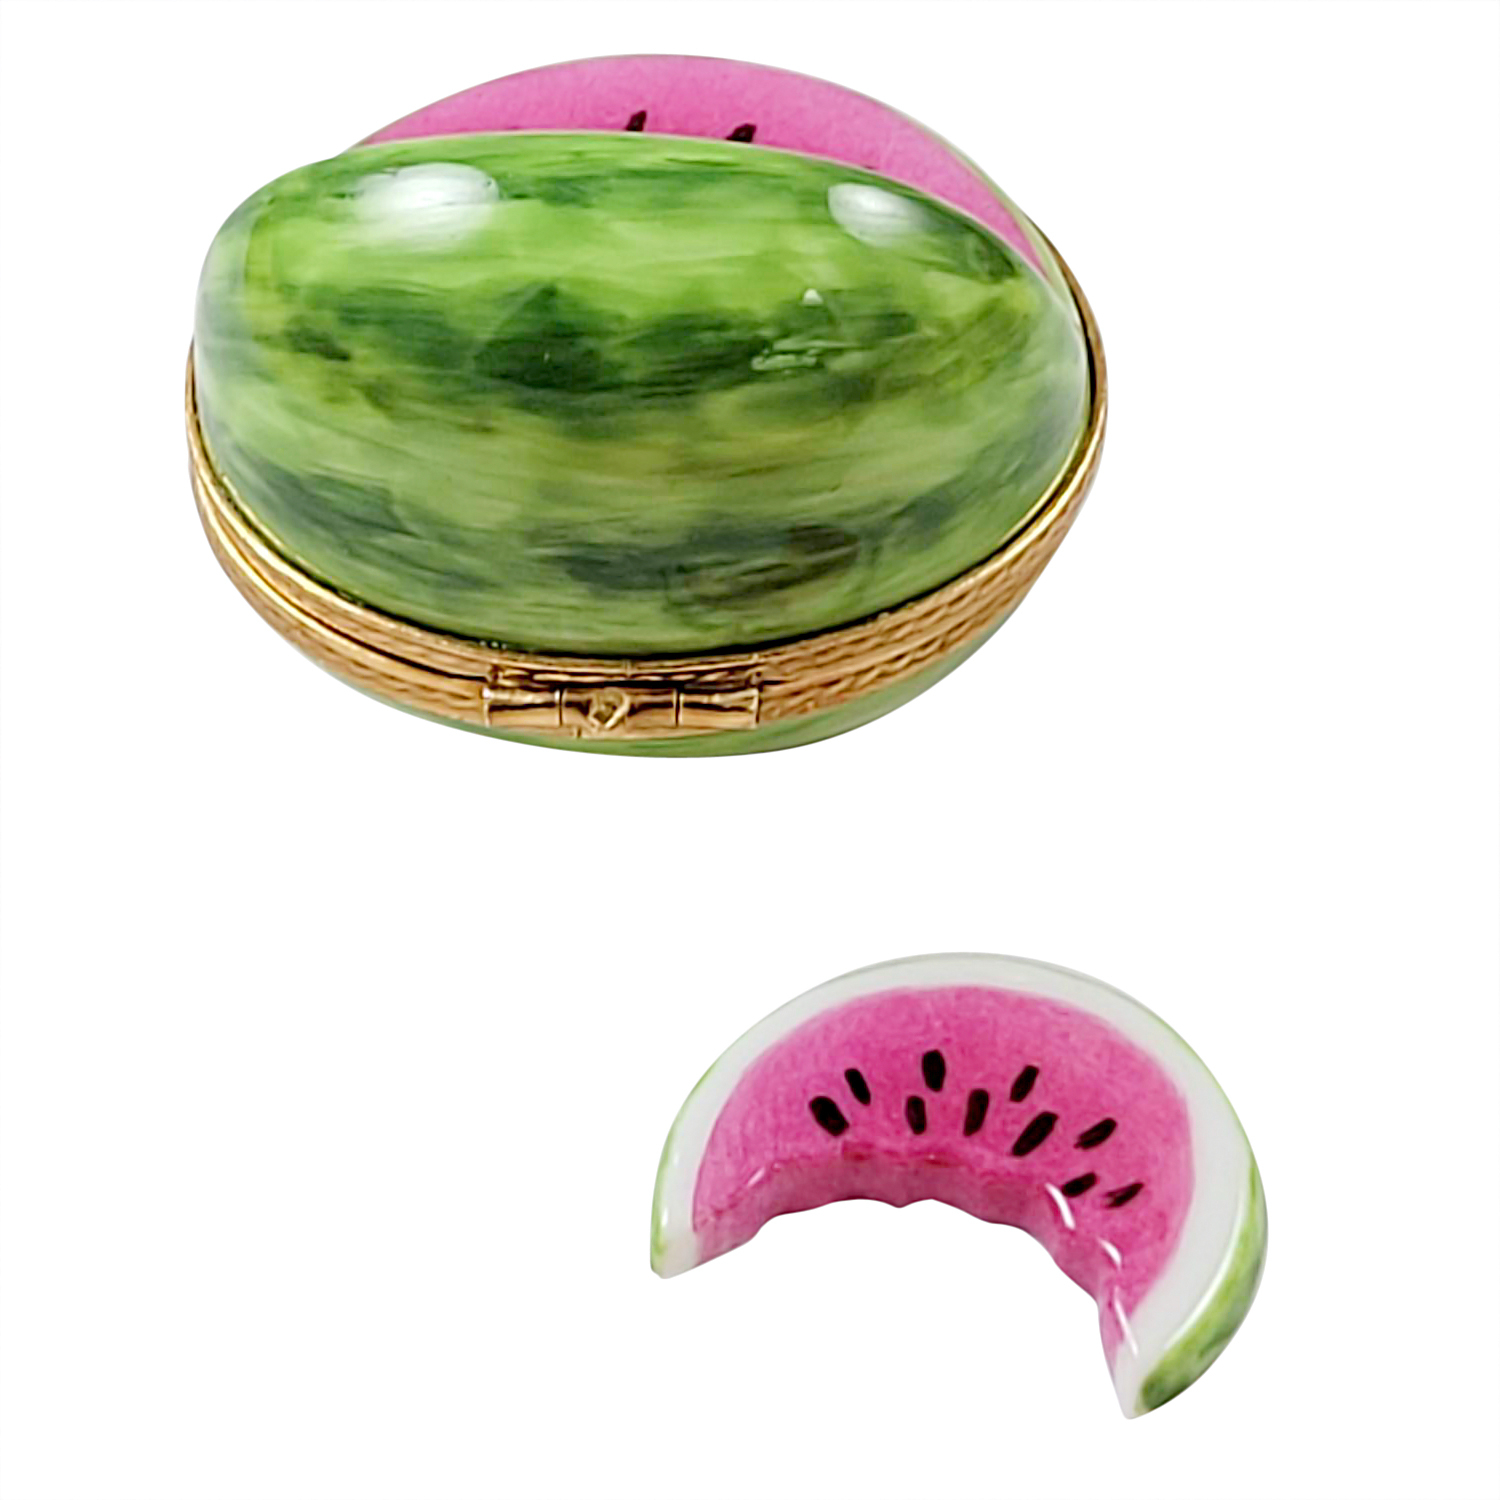 Watermelon With Removable Slice